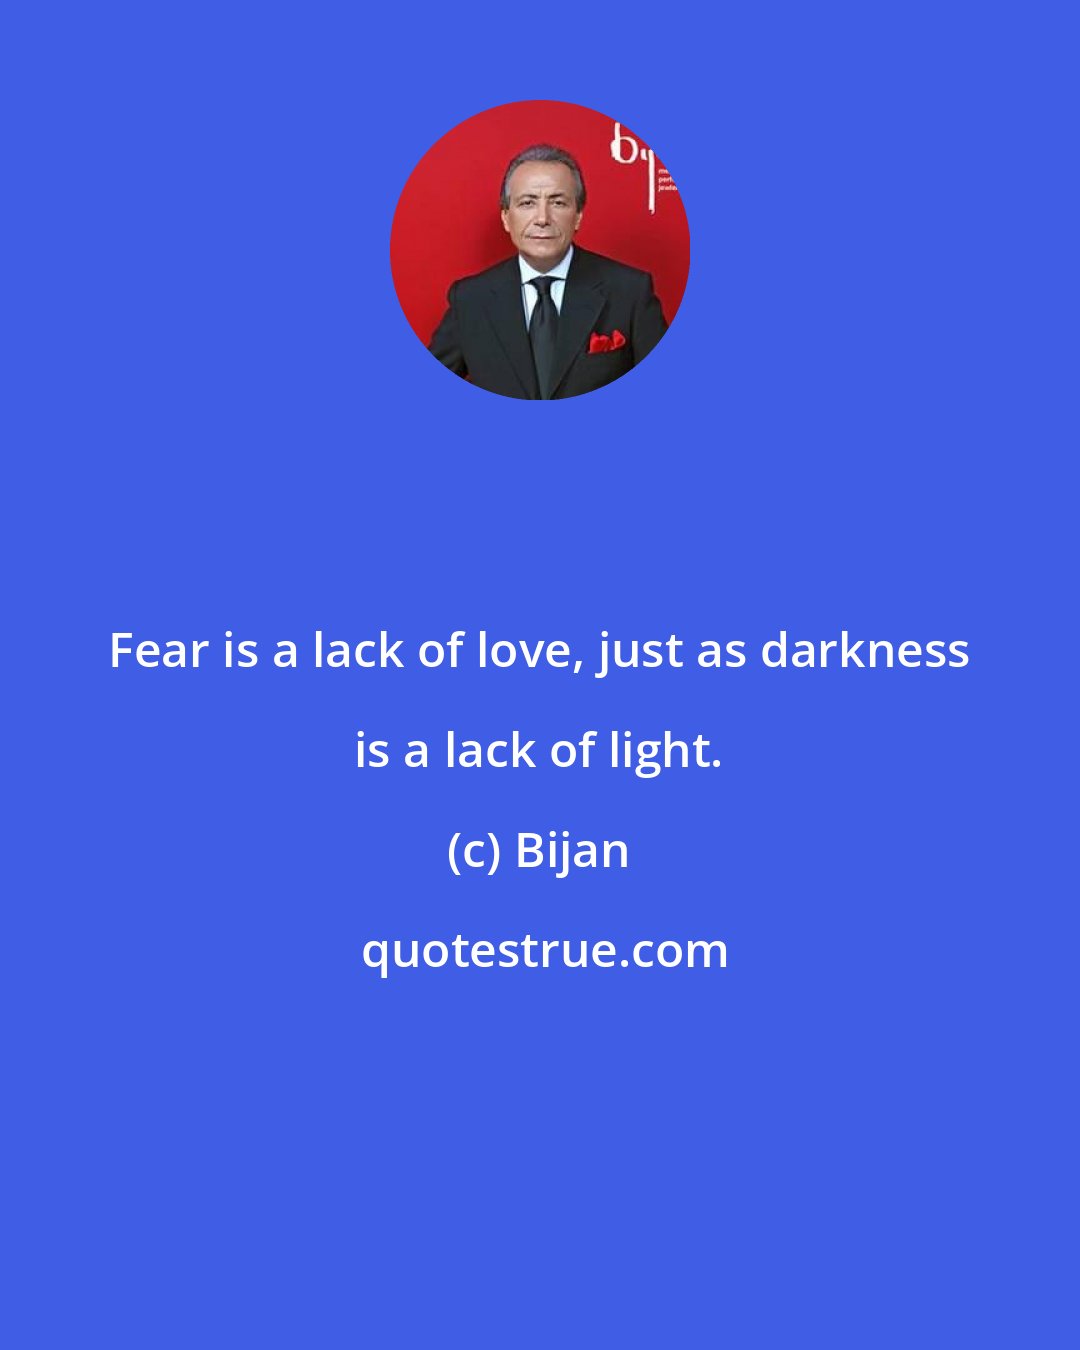 Bijan: Fear is a lack of love, just as darkness is a lack of light.